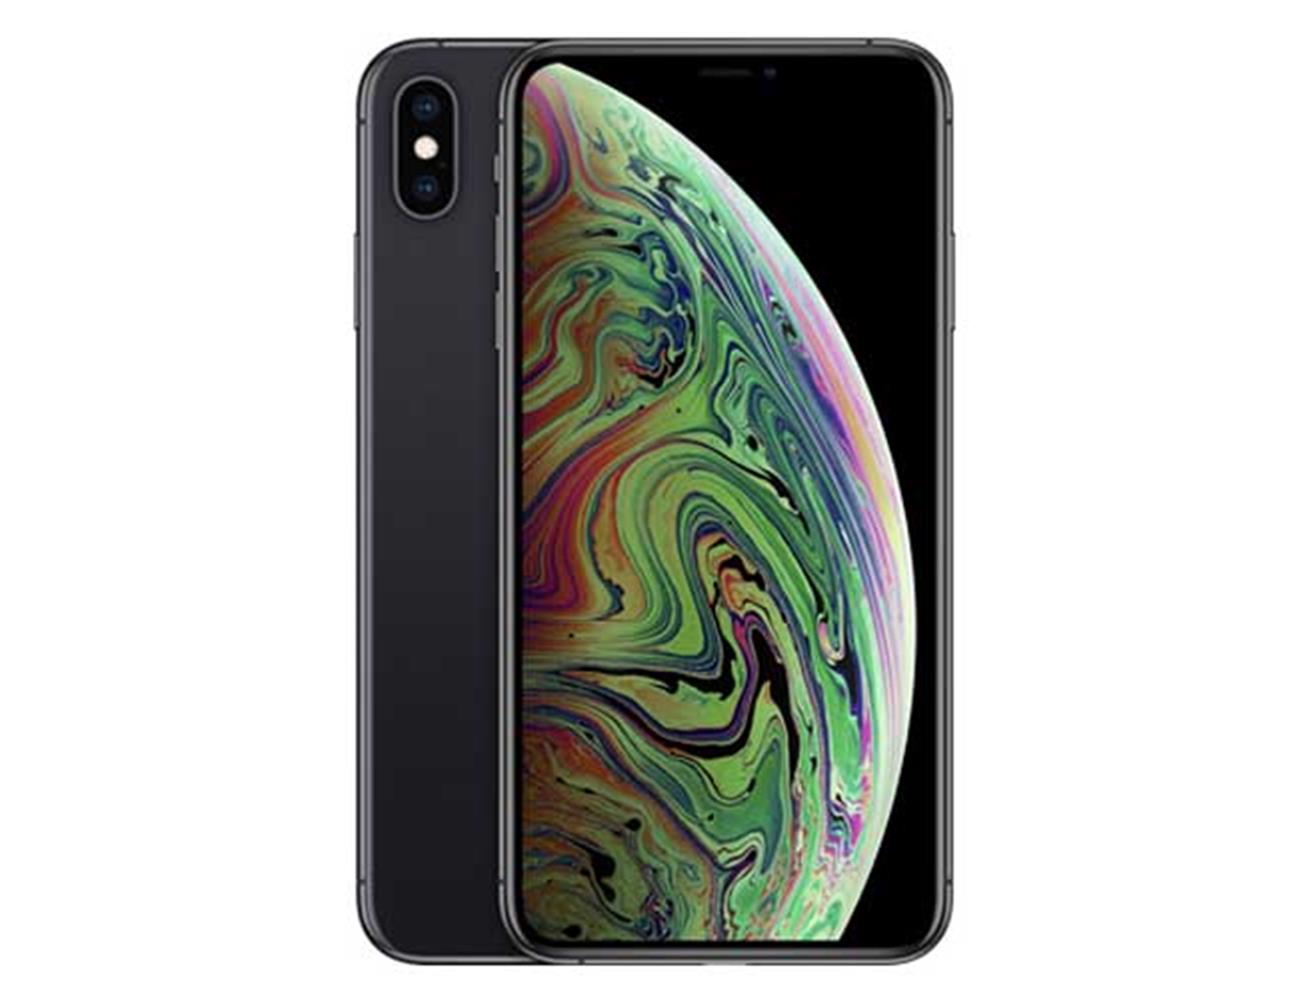 Apple iPhone XS Max 512GB - Space Gray| Blink Kuwait